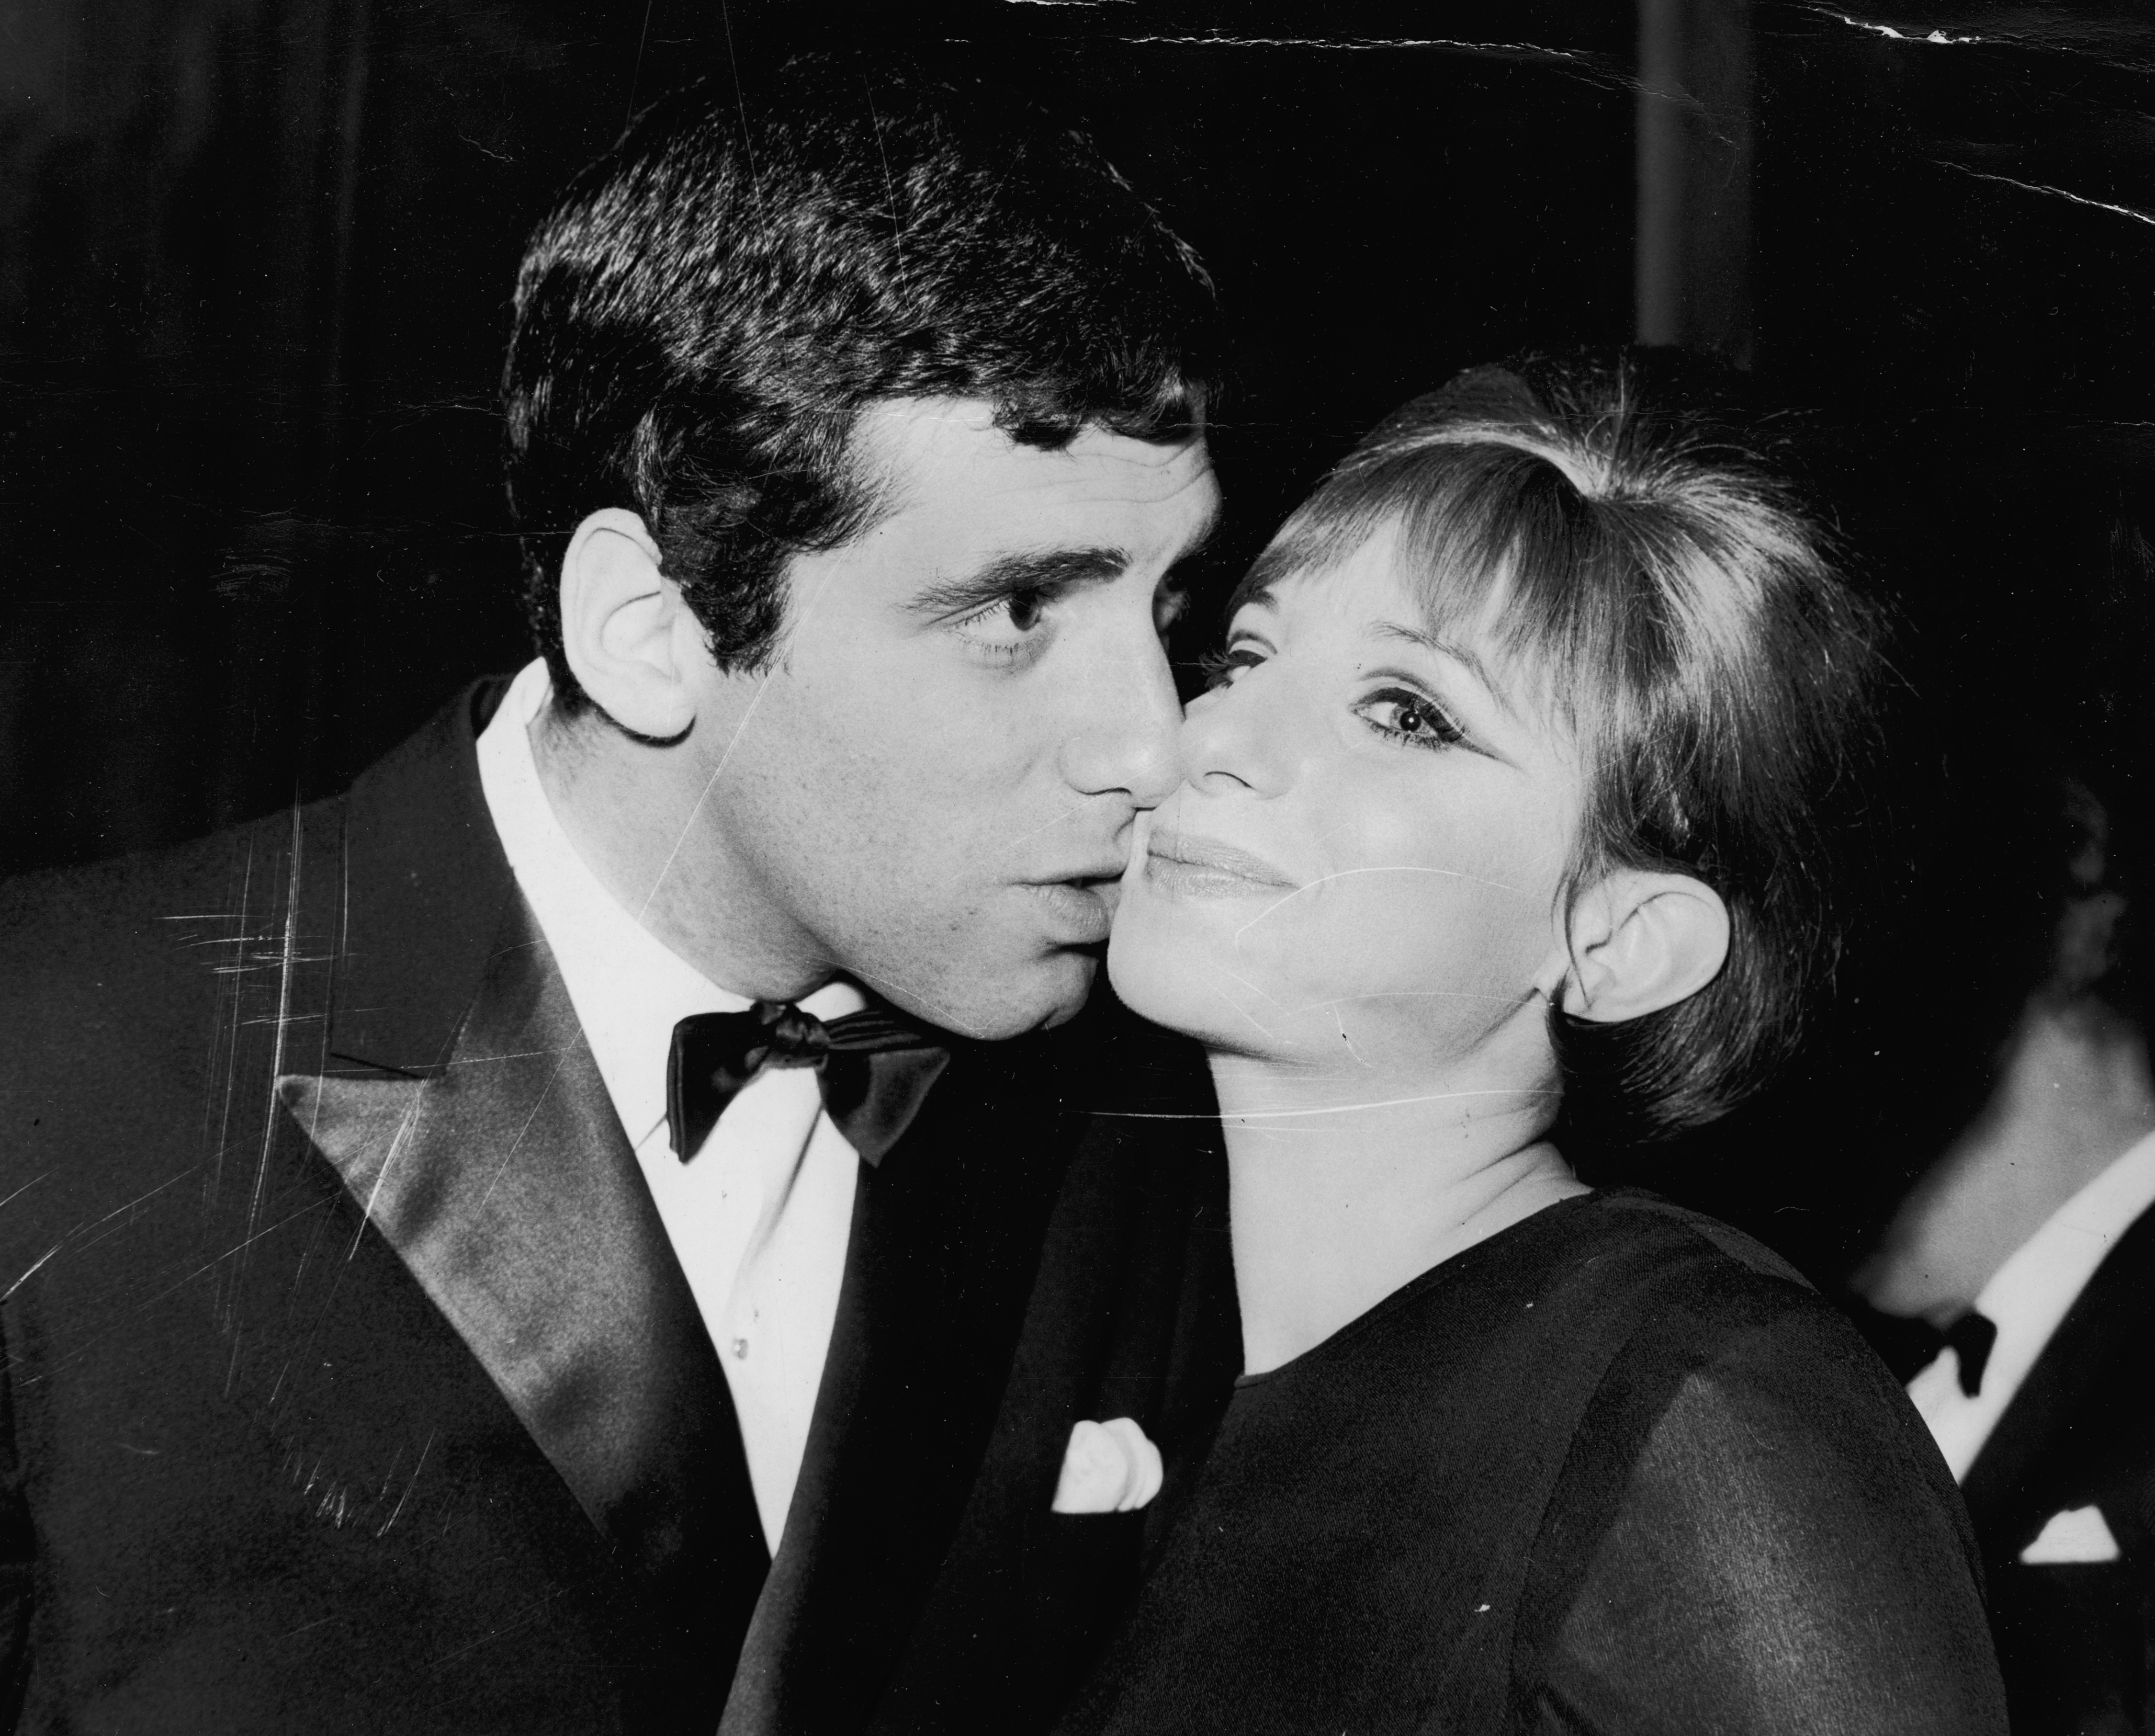 Barbra Streisand with her husband, actor Elliott Gould, at the Prince of Wales Theatre in London on April 13, 1966  | Source: Getty Images